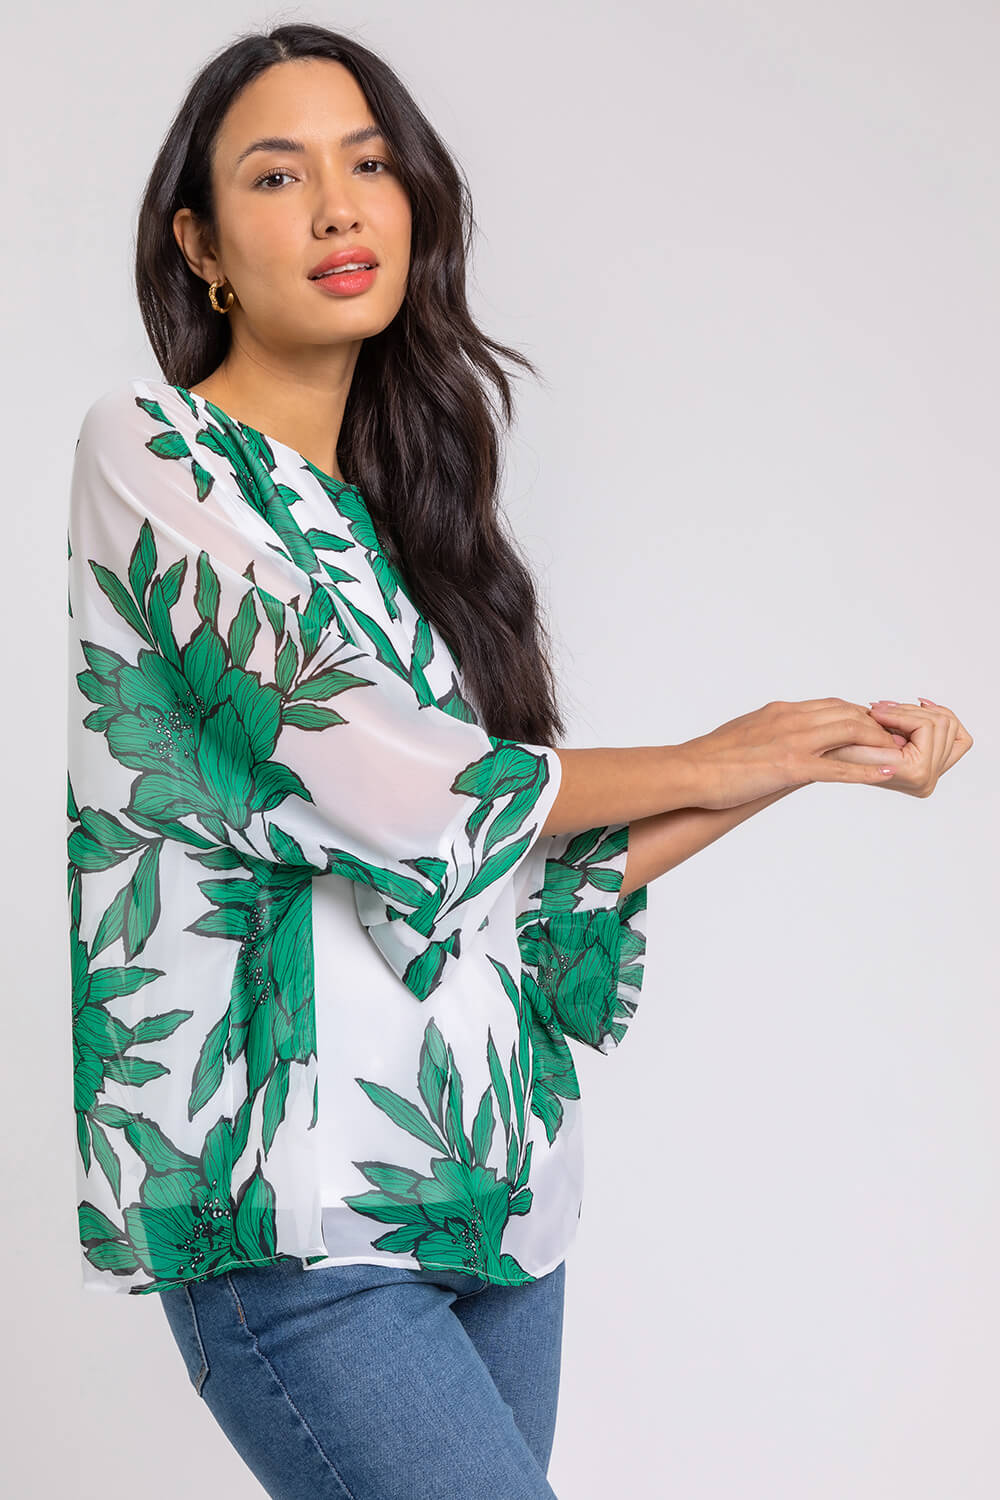 Green Floral Print Chiffon Overlay Top, Image 4 of 5